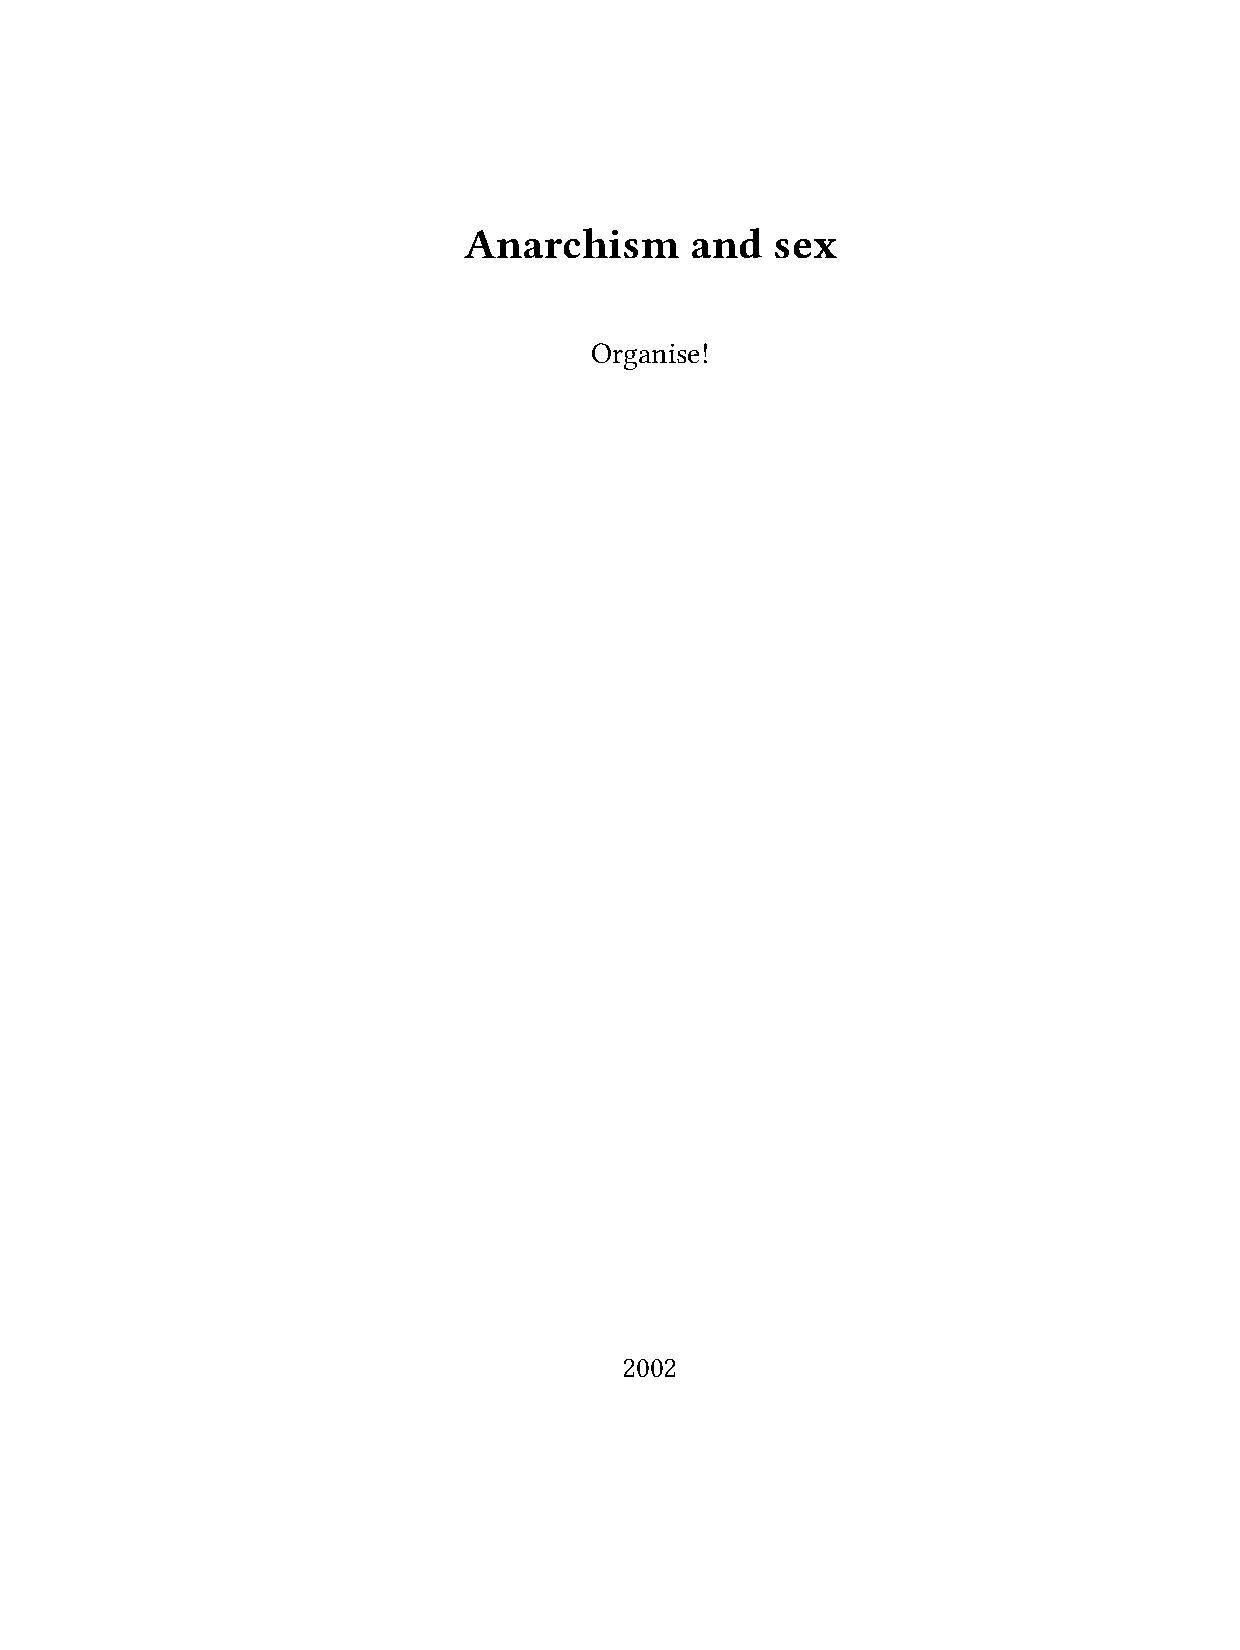 Anarchism and sex - Organise!